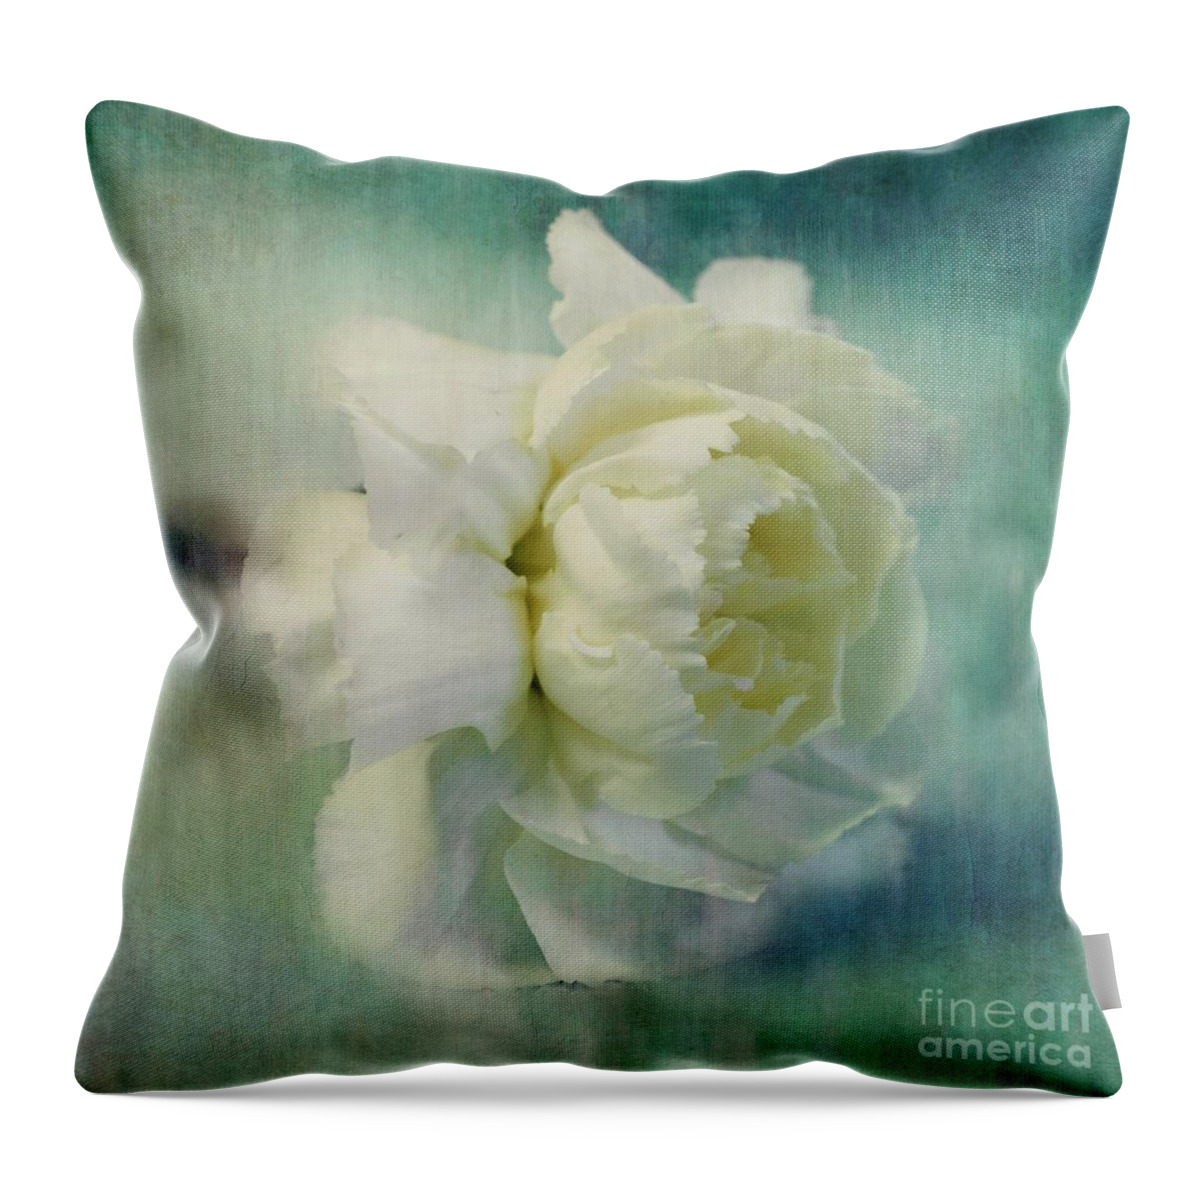 Carnation Throw Pillow featuring the photograph Carnation by Priska Wettstein